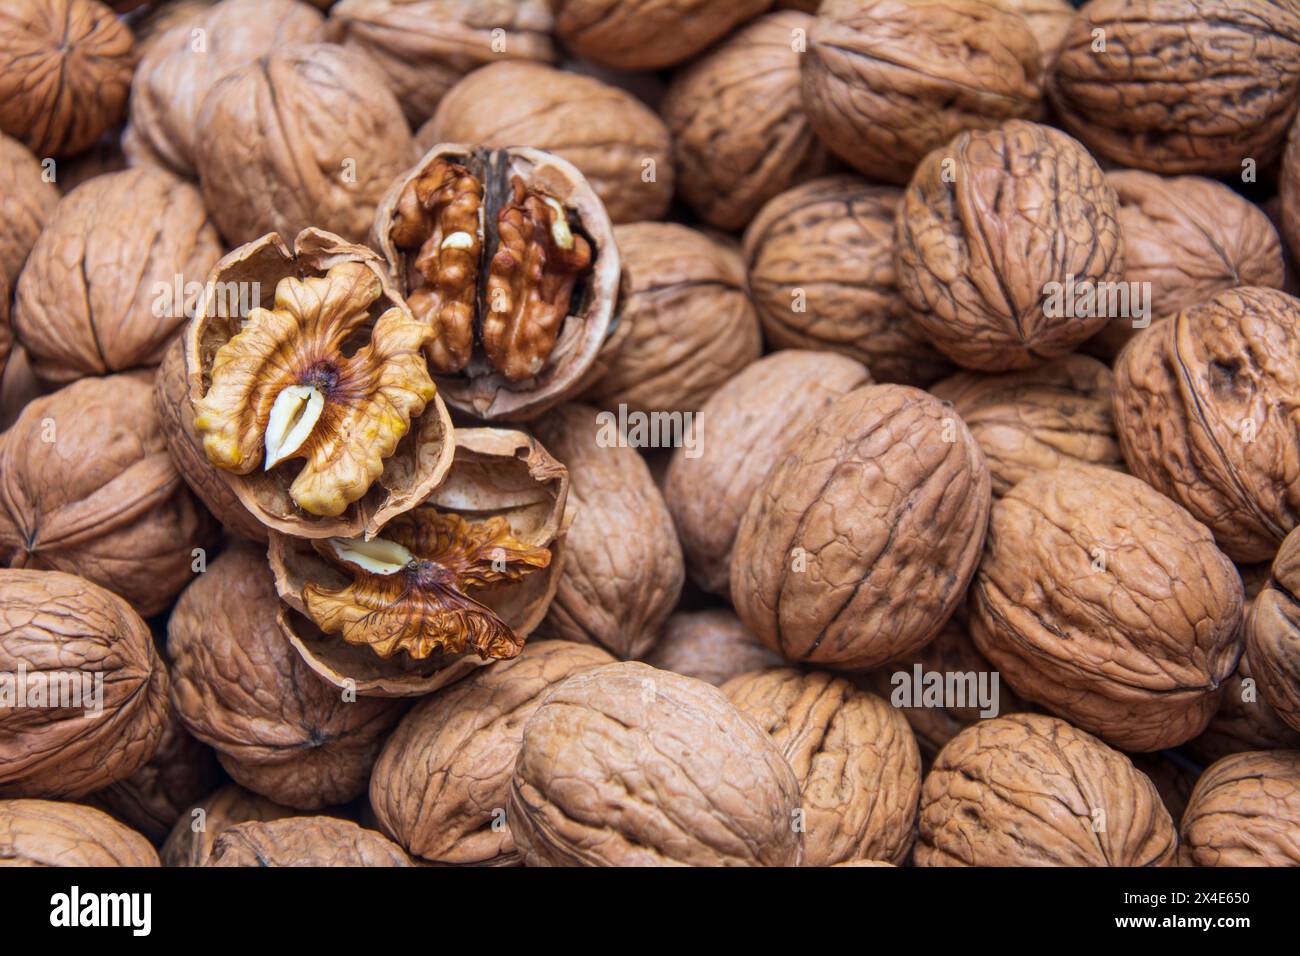 Cracked walnuts on a background covered with walnuts Stock Photo